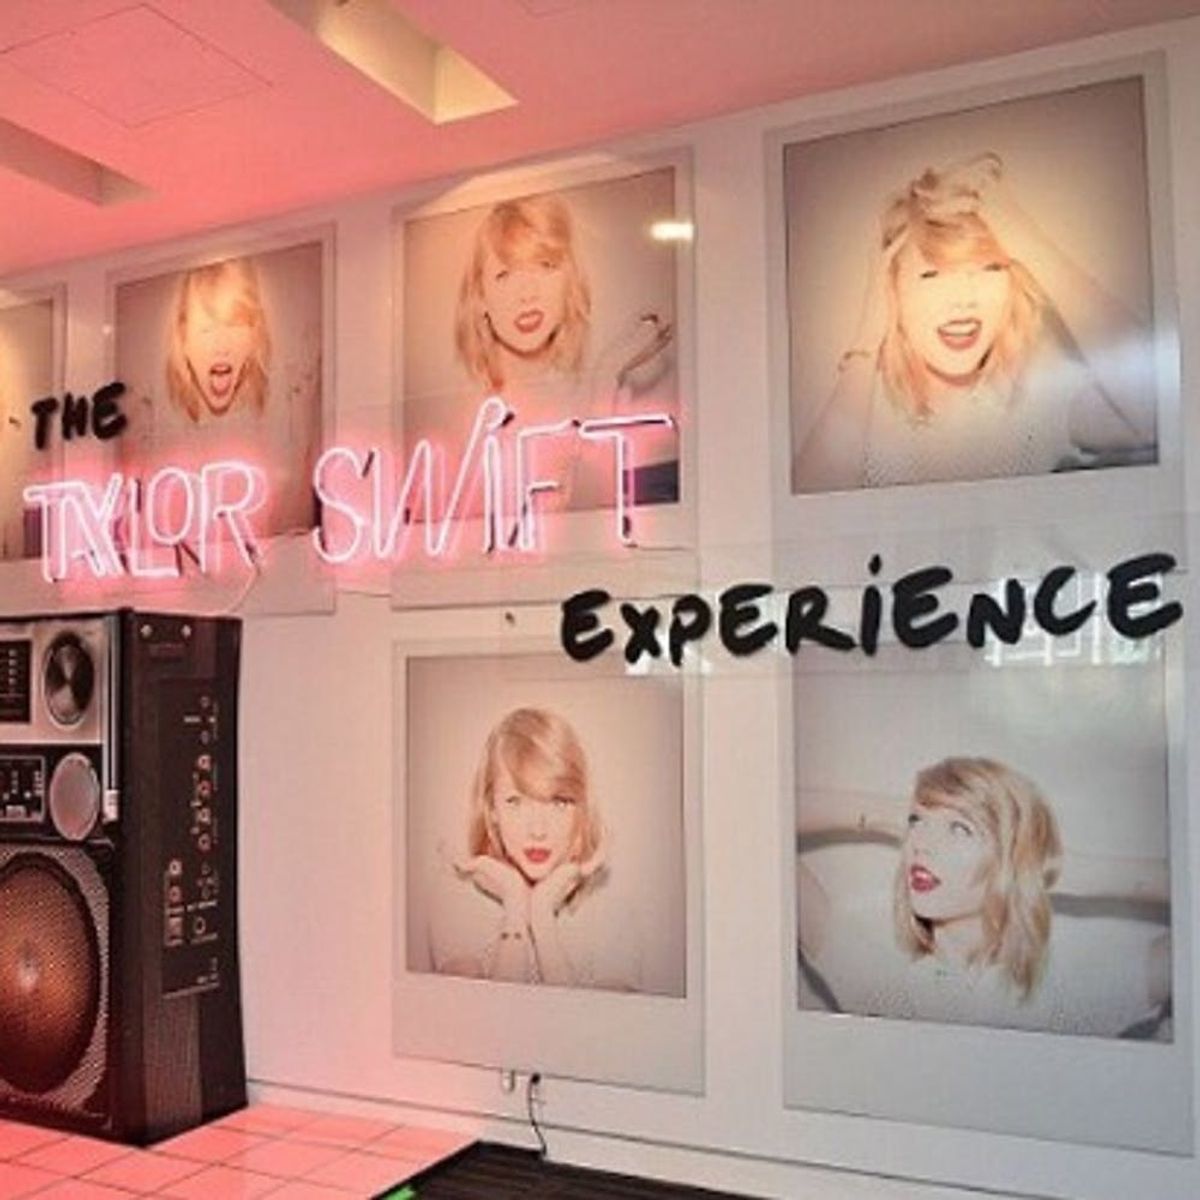 Here’s Your First Look at The Taylor Swift Experience